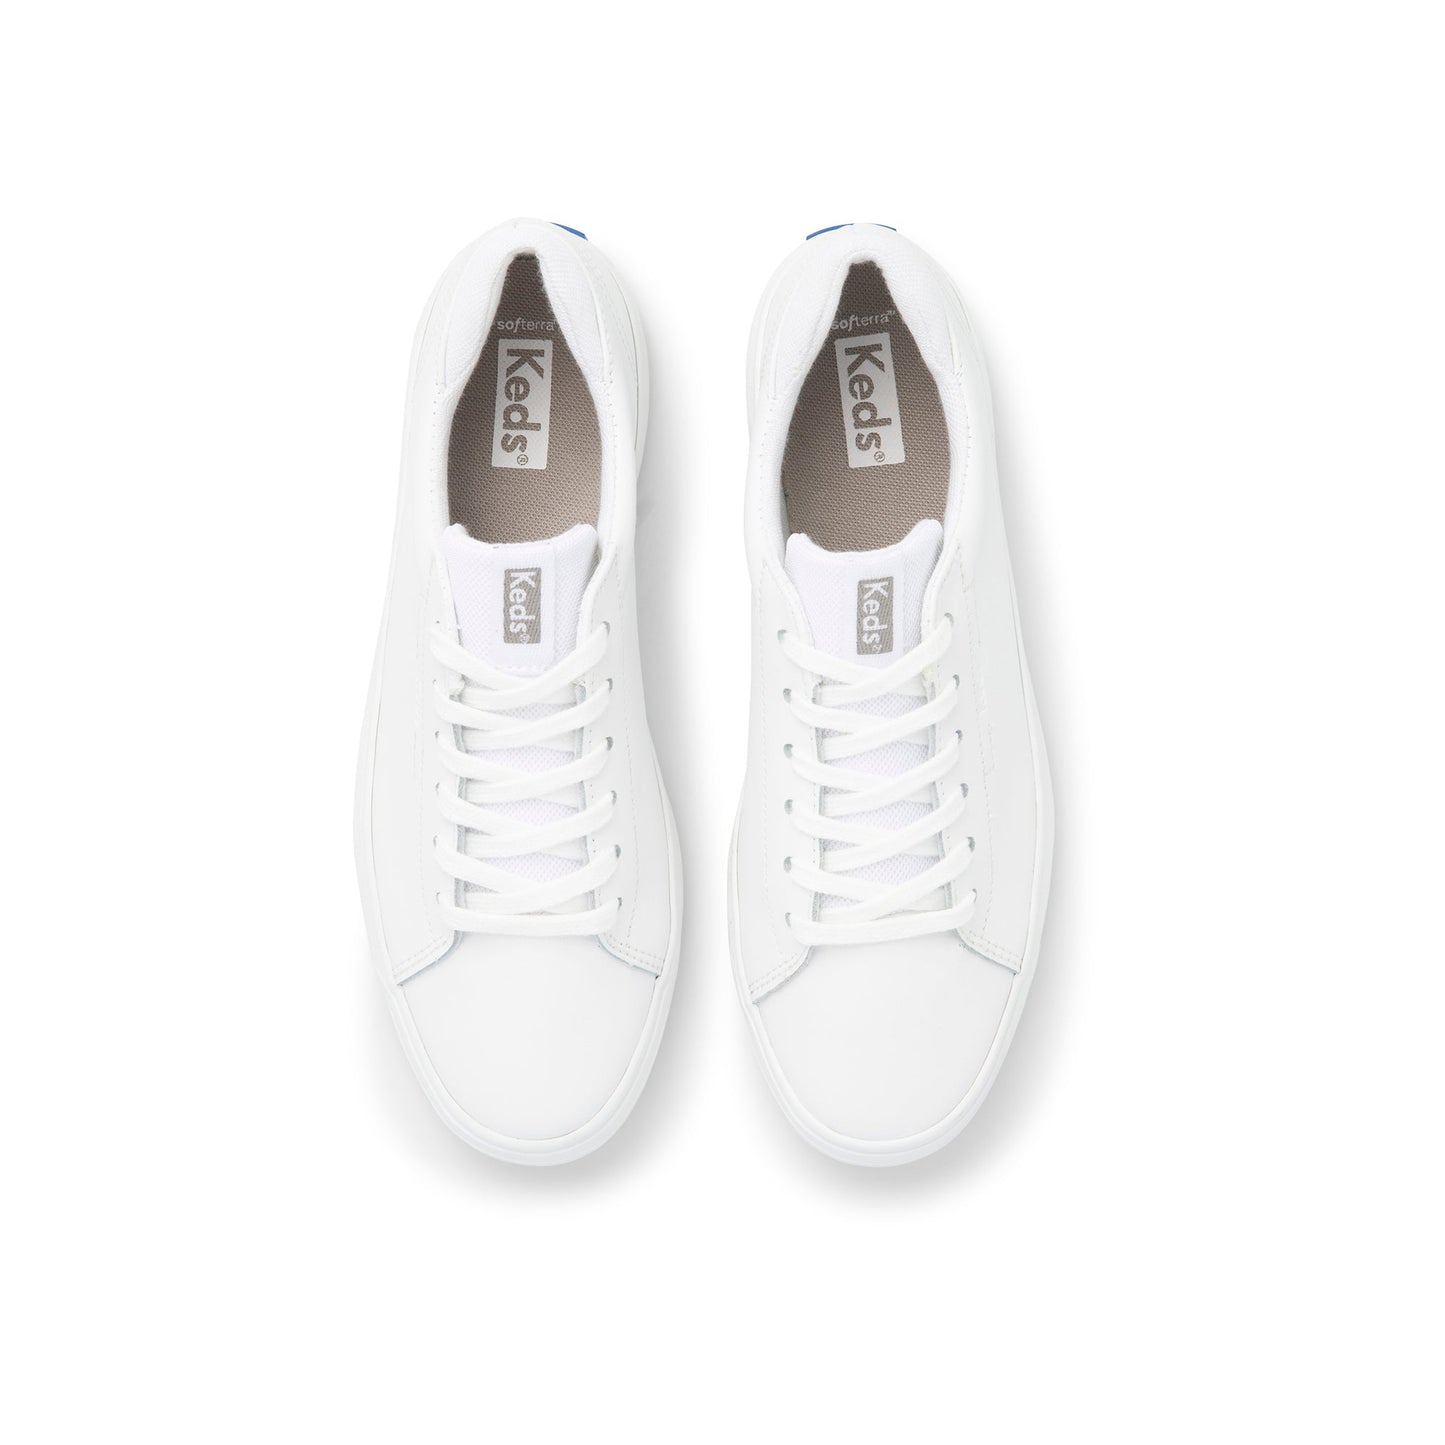 Keds Women's Alley Leather White (WH65869)